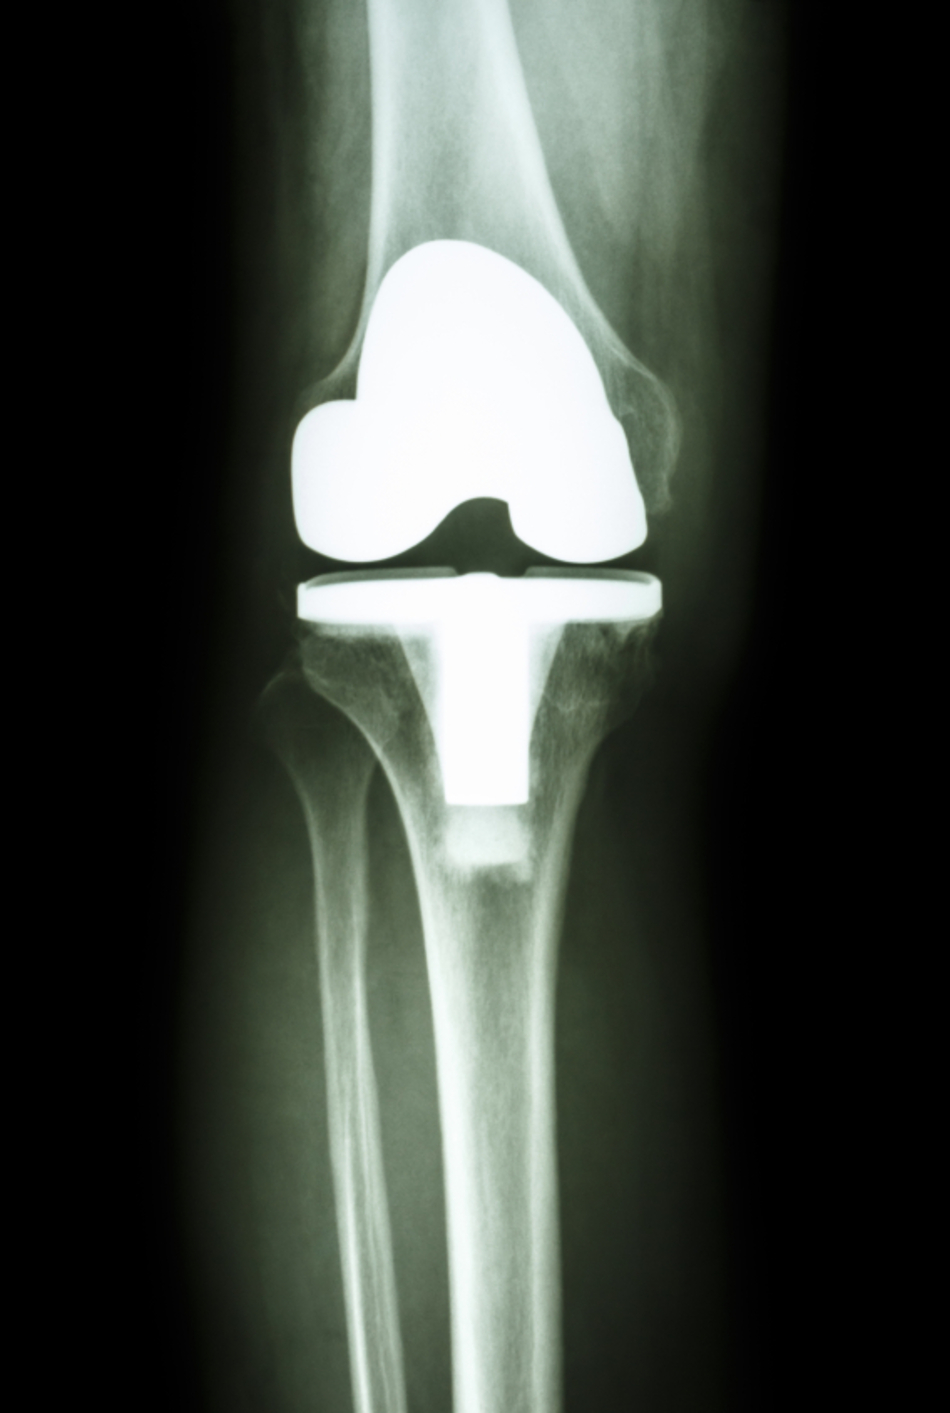 Hip Replacement Recovery: Guidelines, Tips, & Equipment, University of  Utah Health